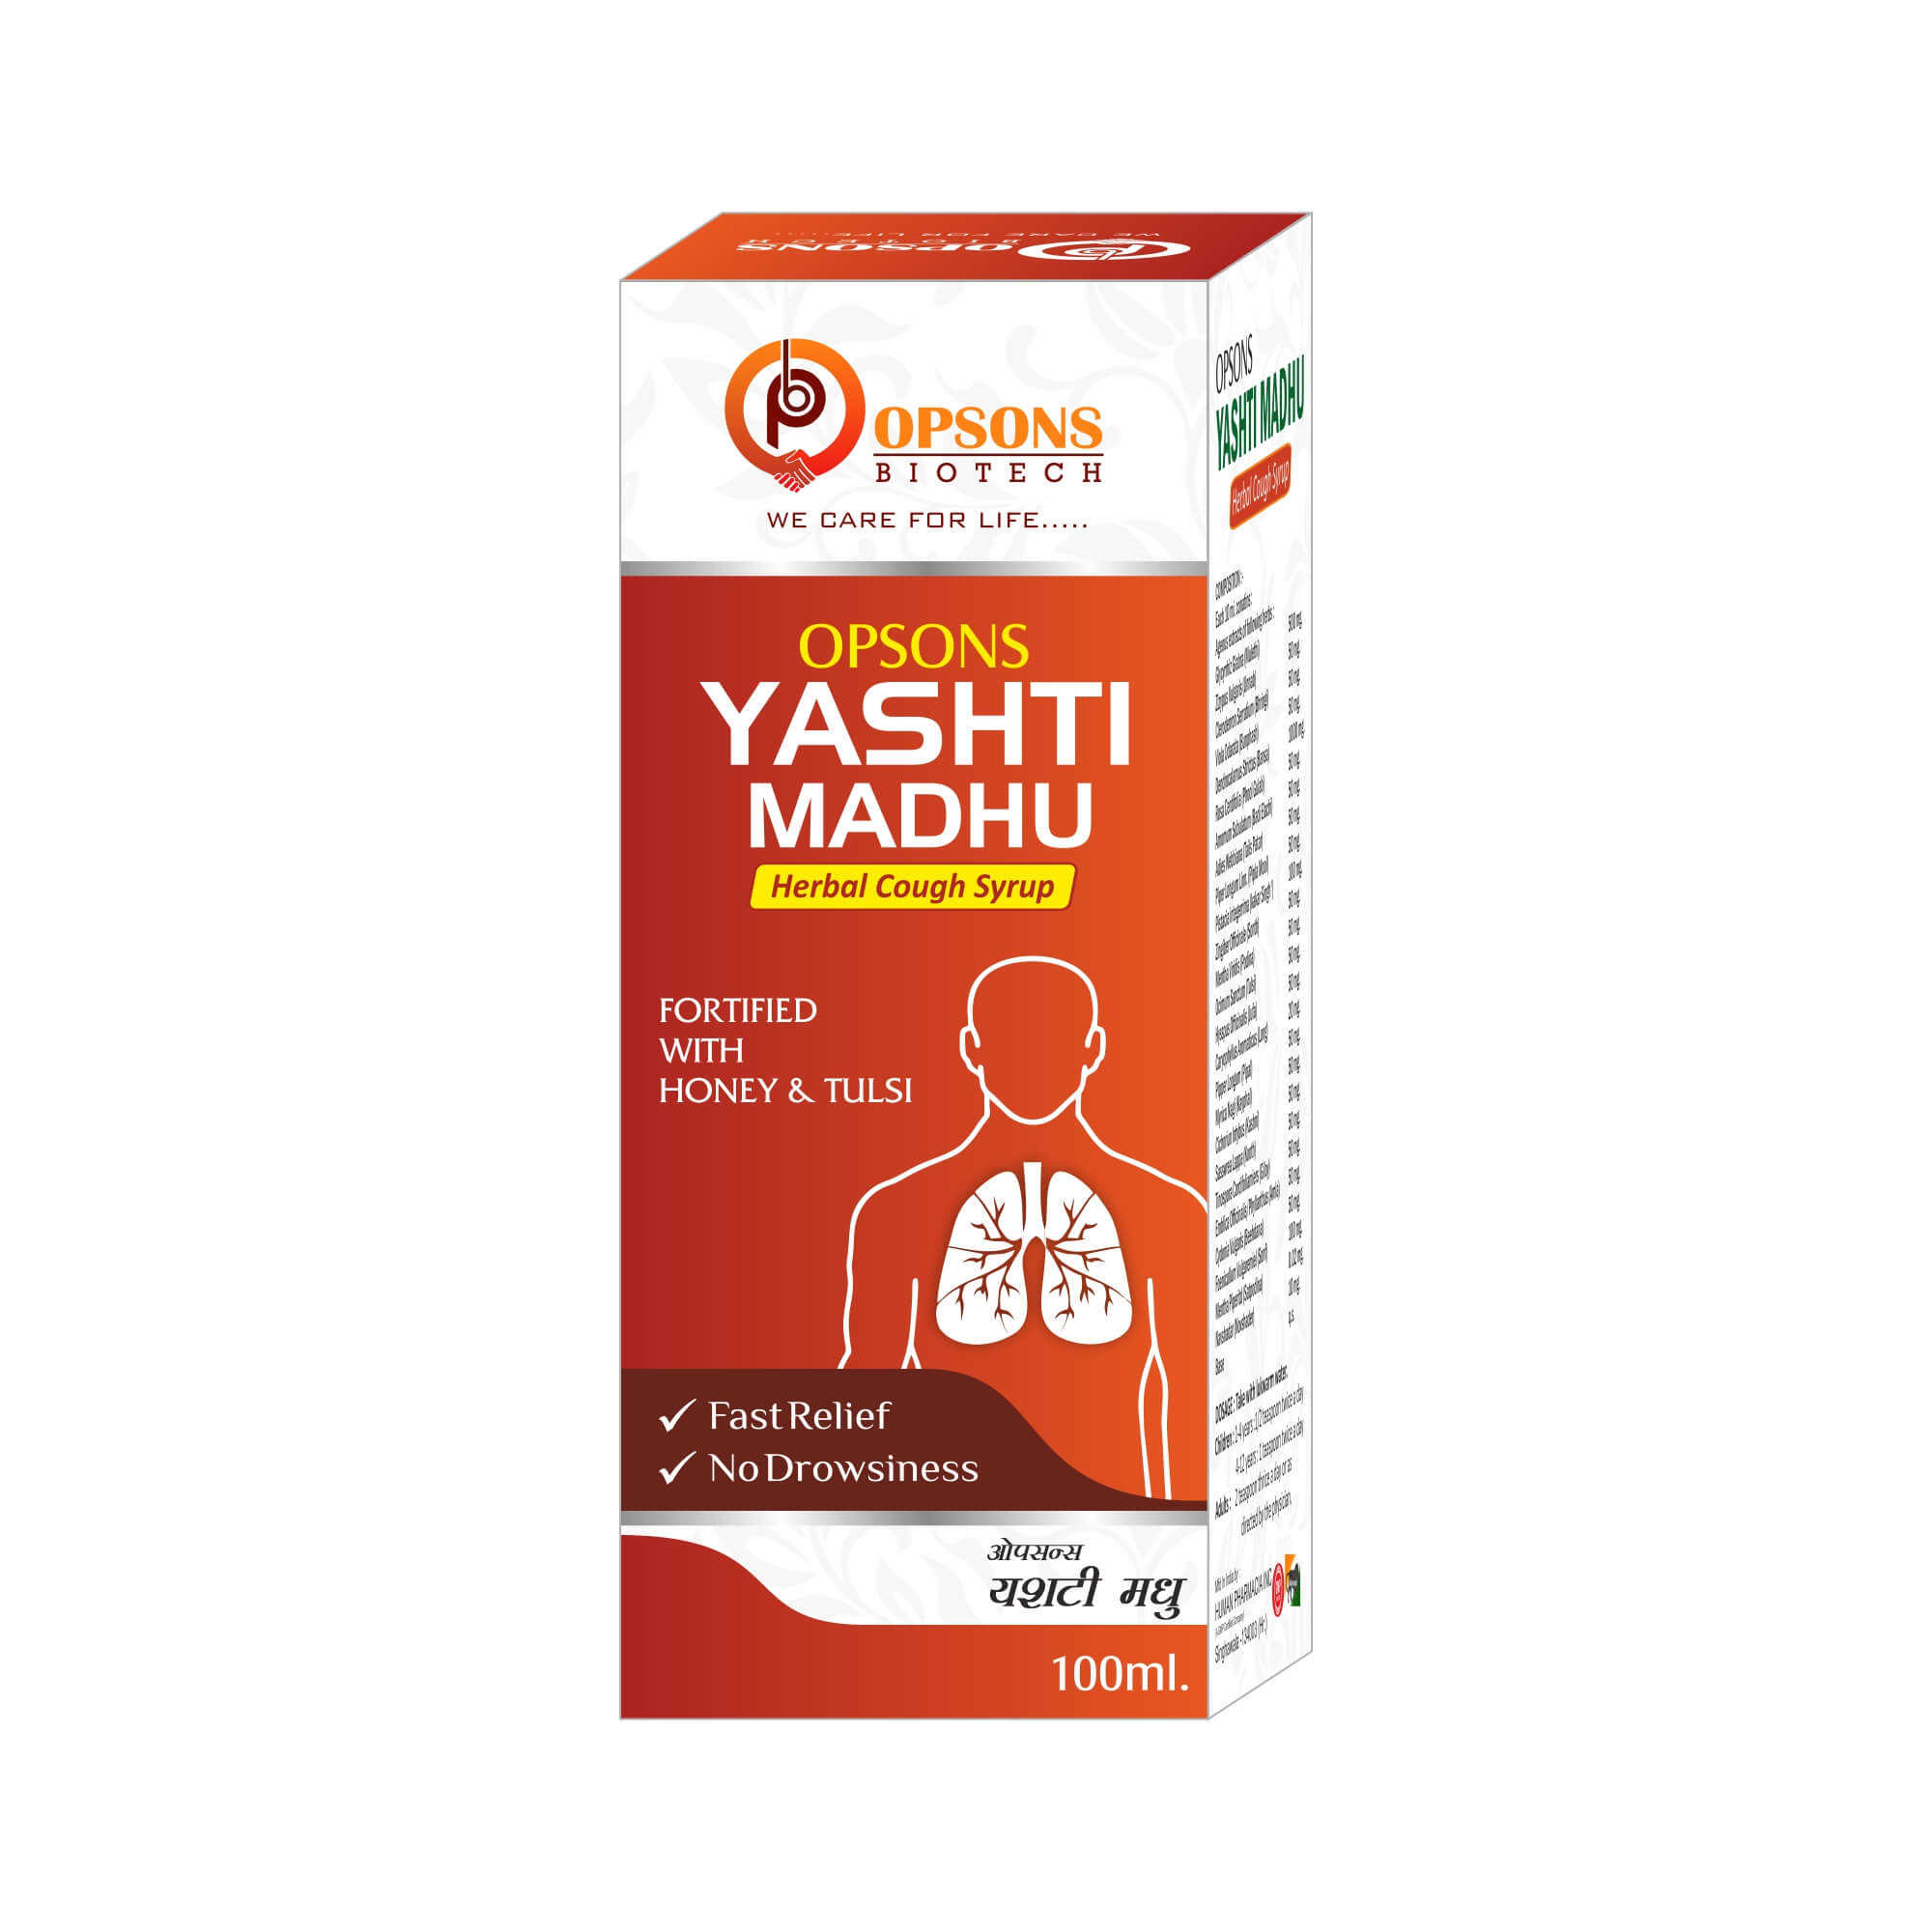 Product Name: Yasti Madhu, Compositions of Yasti Madhu are Fortified with Honey & Tulsi - Opsons Biotech